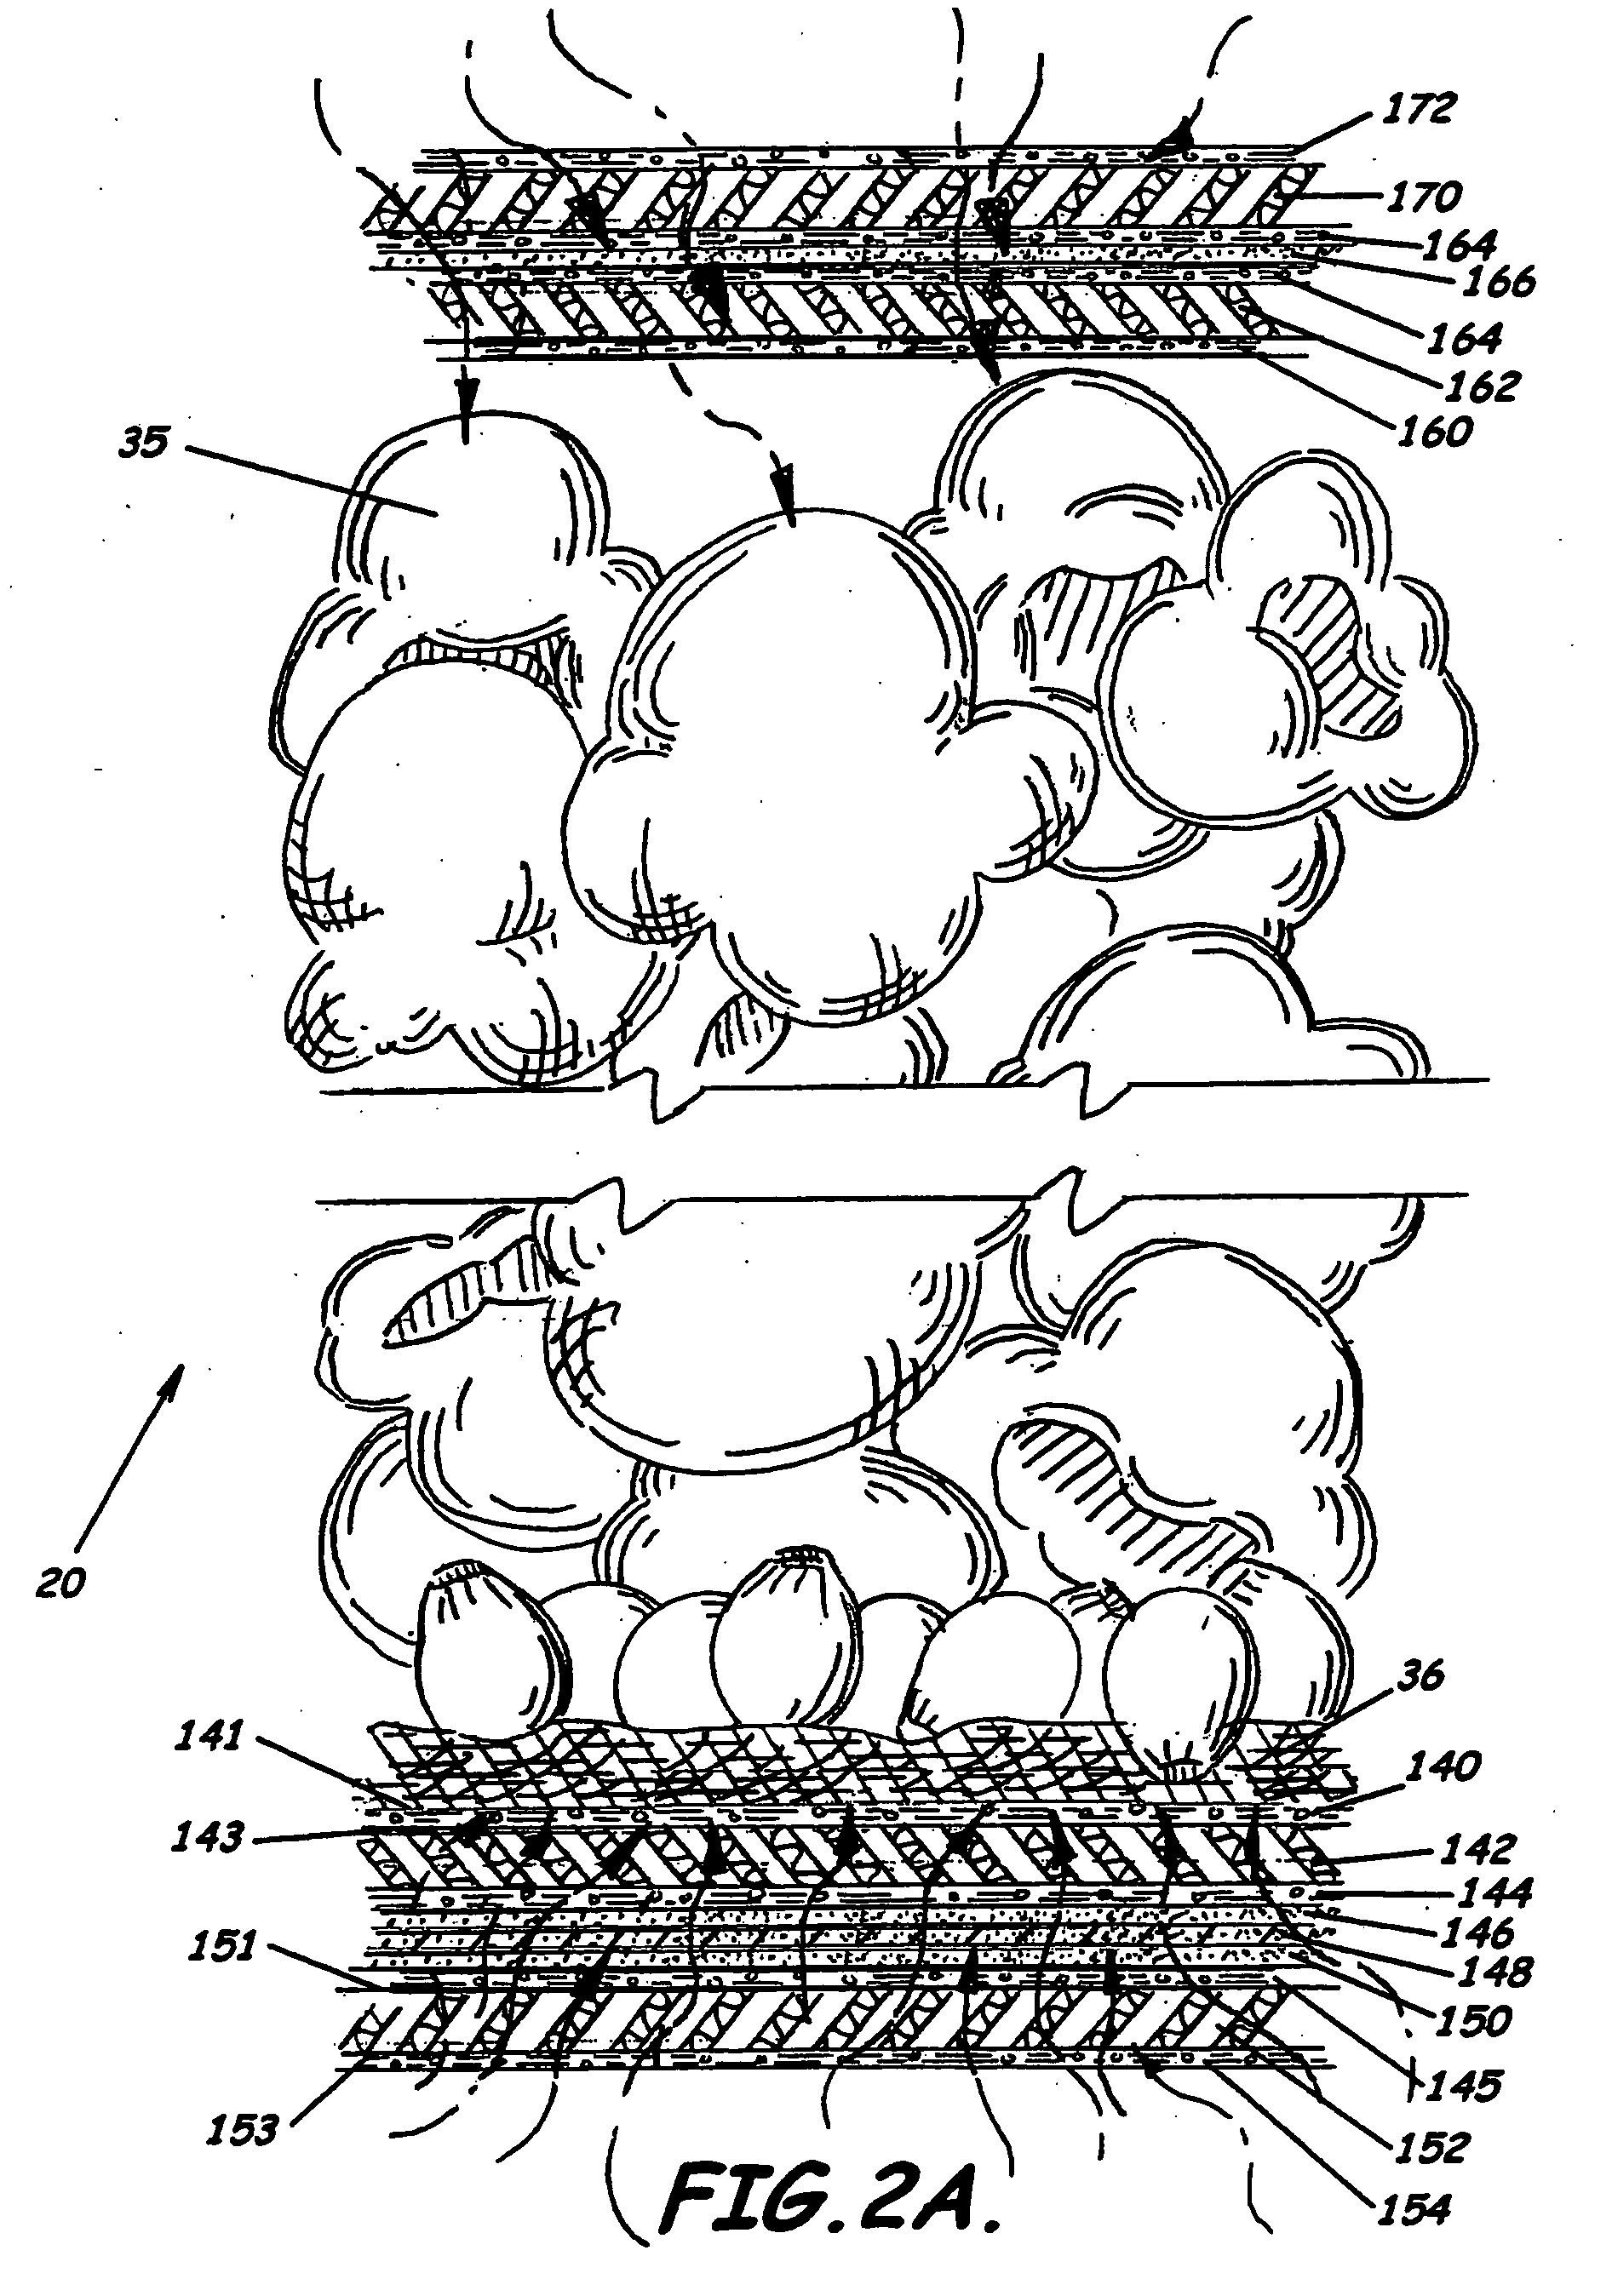 Non-fluorocarbon high temperature packaging having flexible starch-based film and methods of producing same